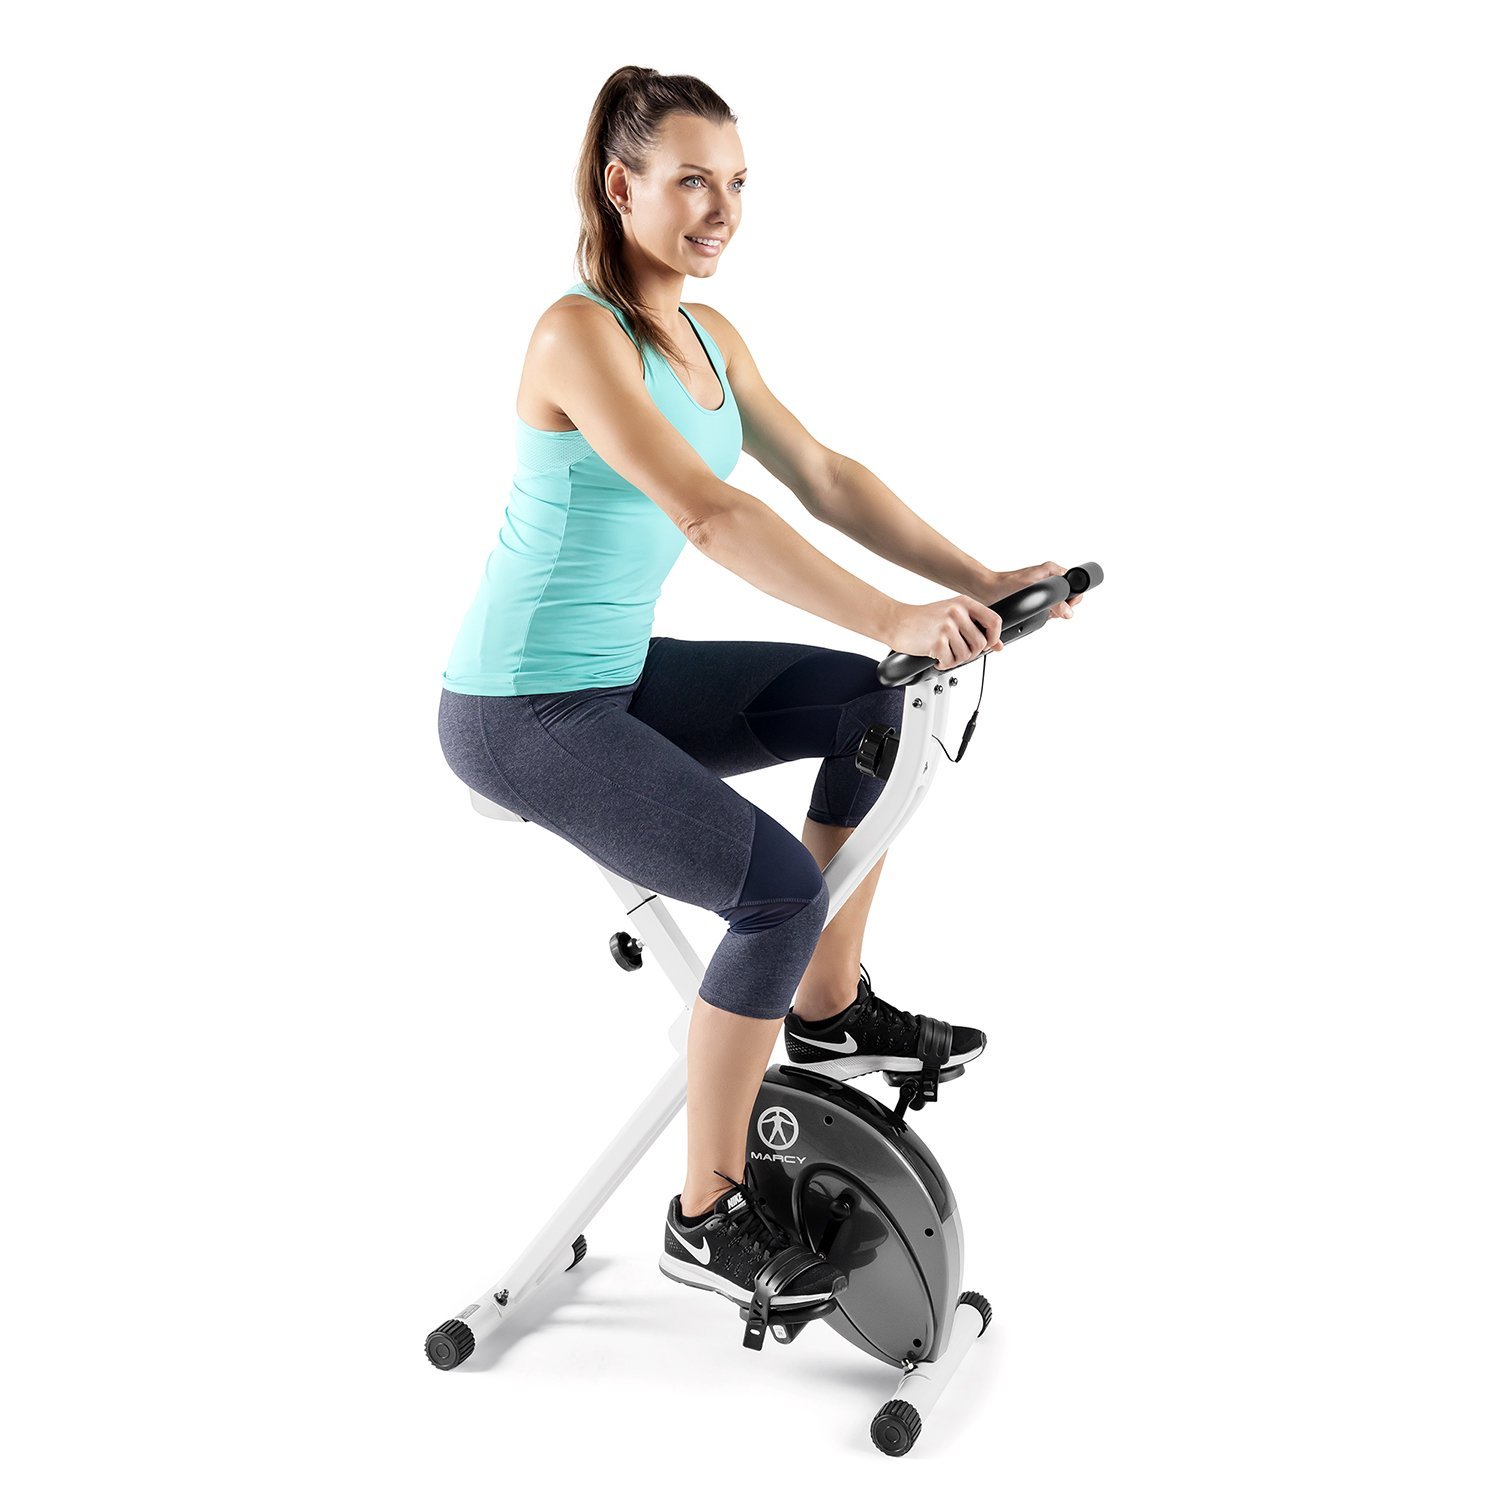 Marcy Foldable Exercise Bike Compact Cycling NS-652 - image 2 of 8